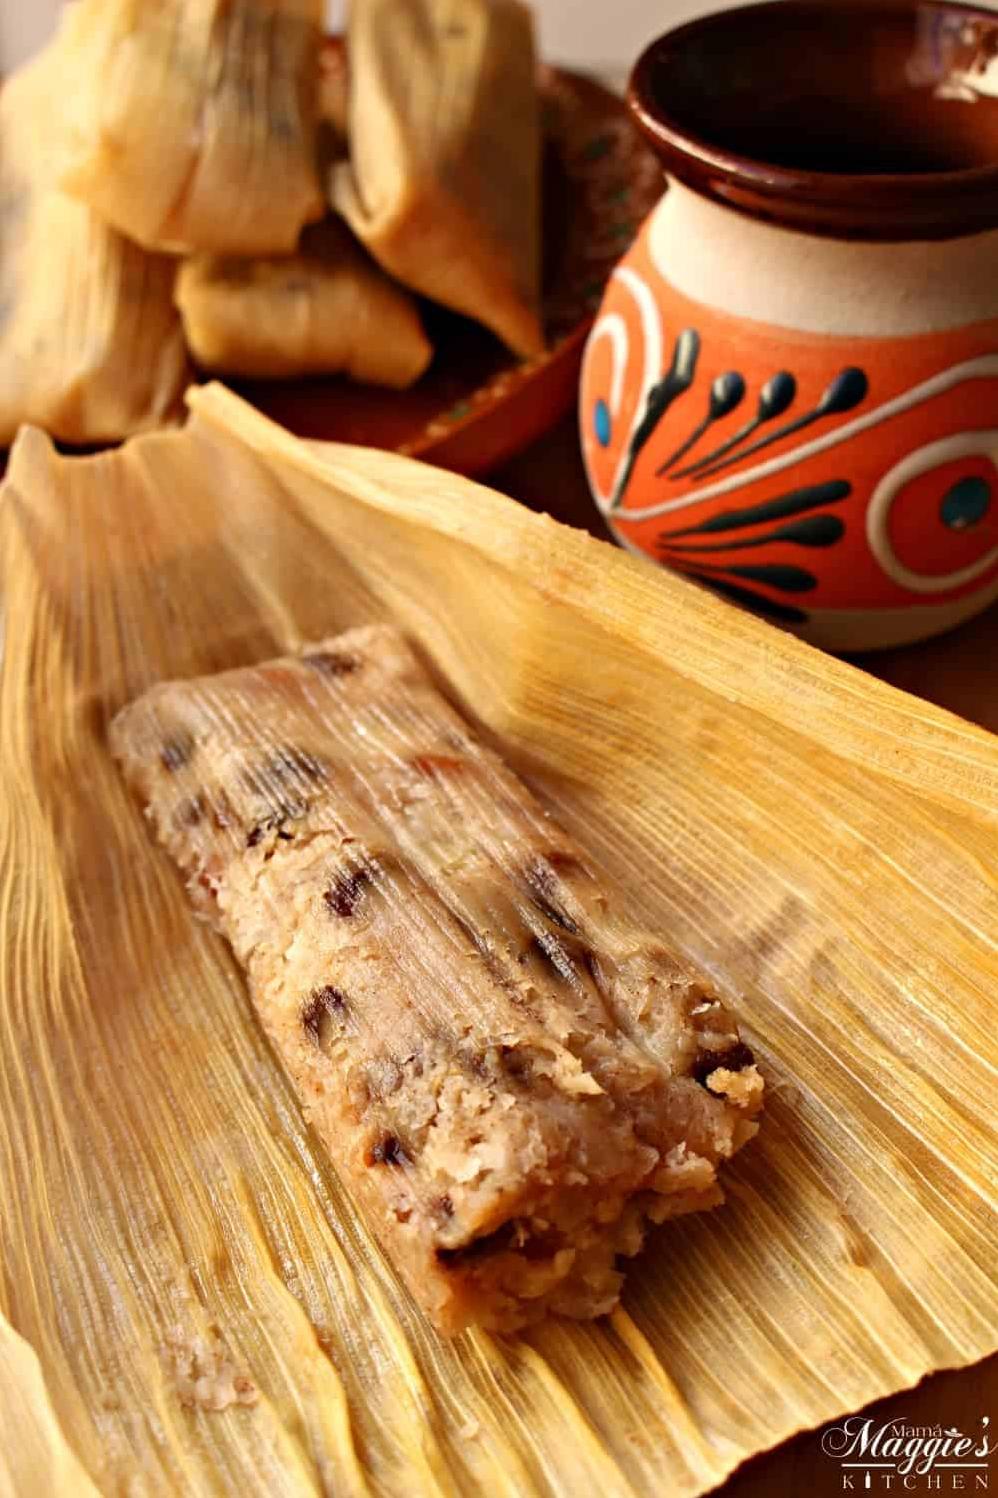  Breakfast, brunch, or dessert? These sweet tamales fit in anywhere